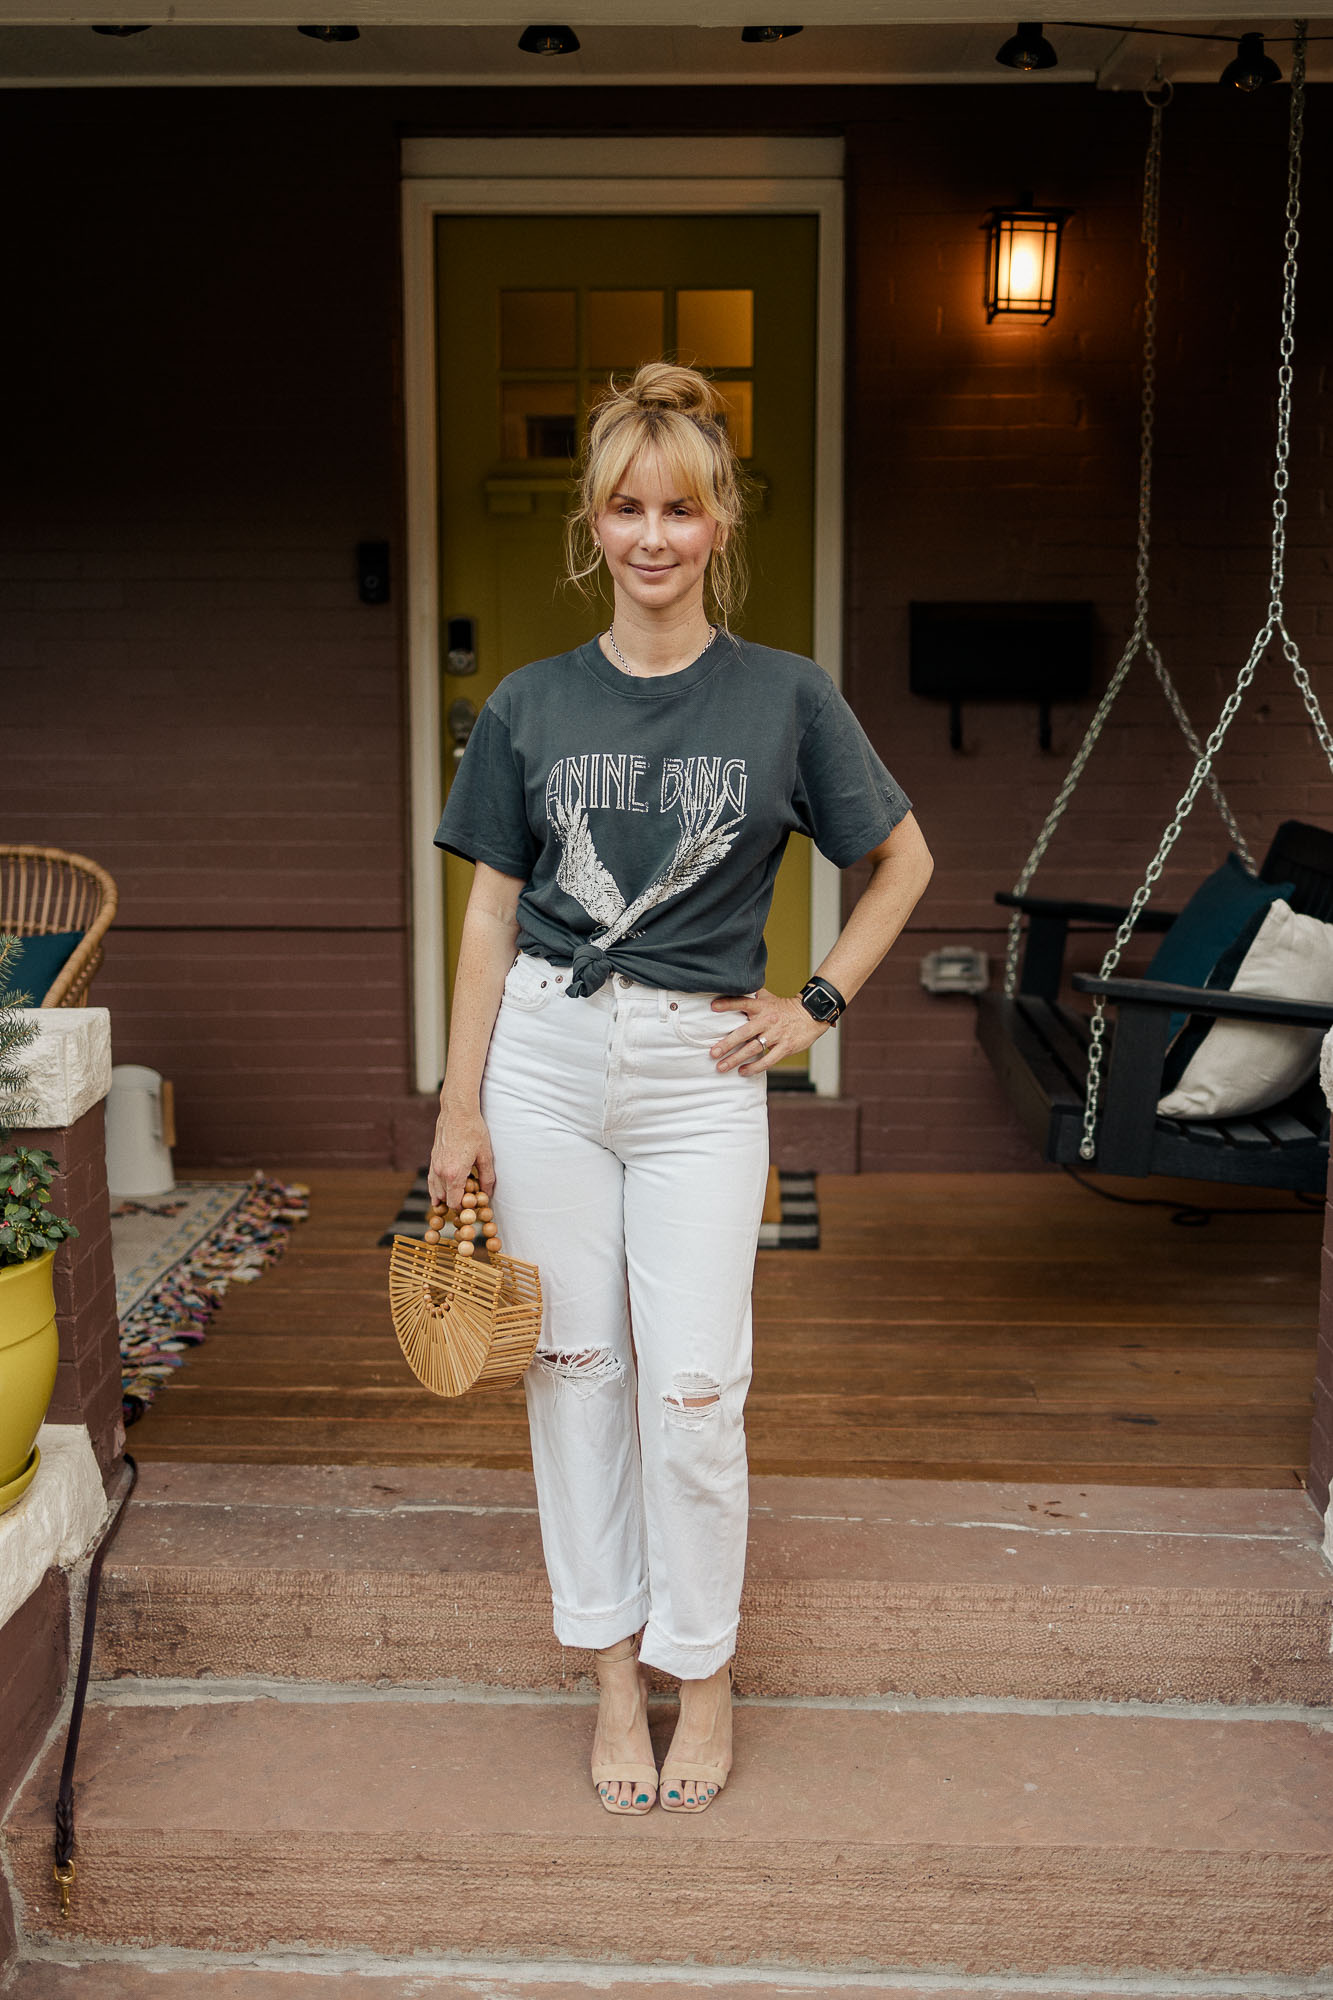 Wearing the Anine Bing Lili tee in washed black with Agolde 90s jeans in white.